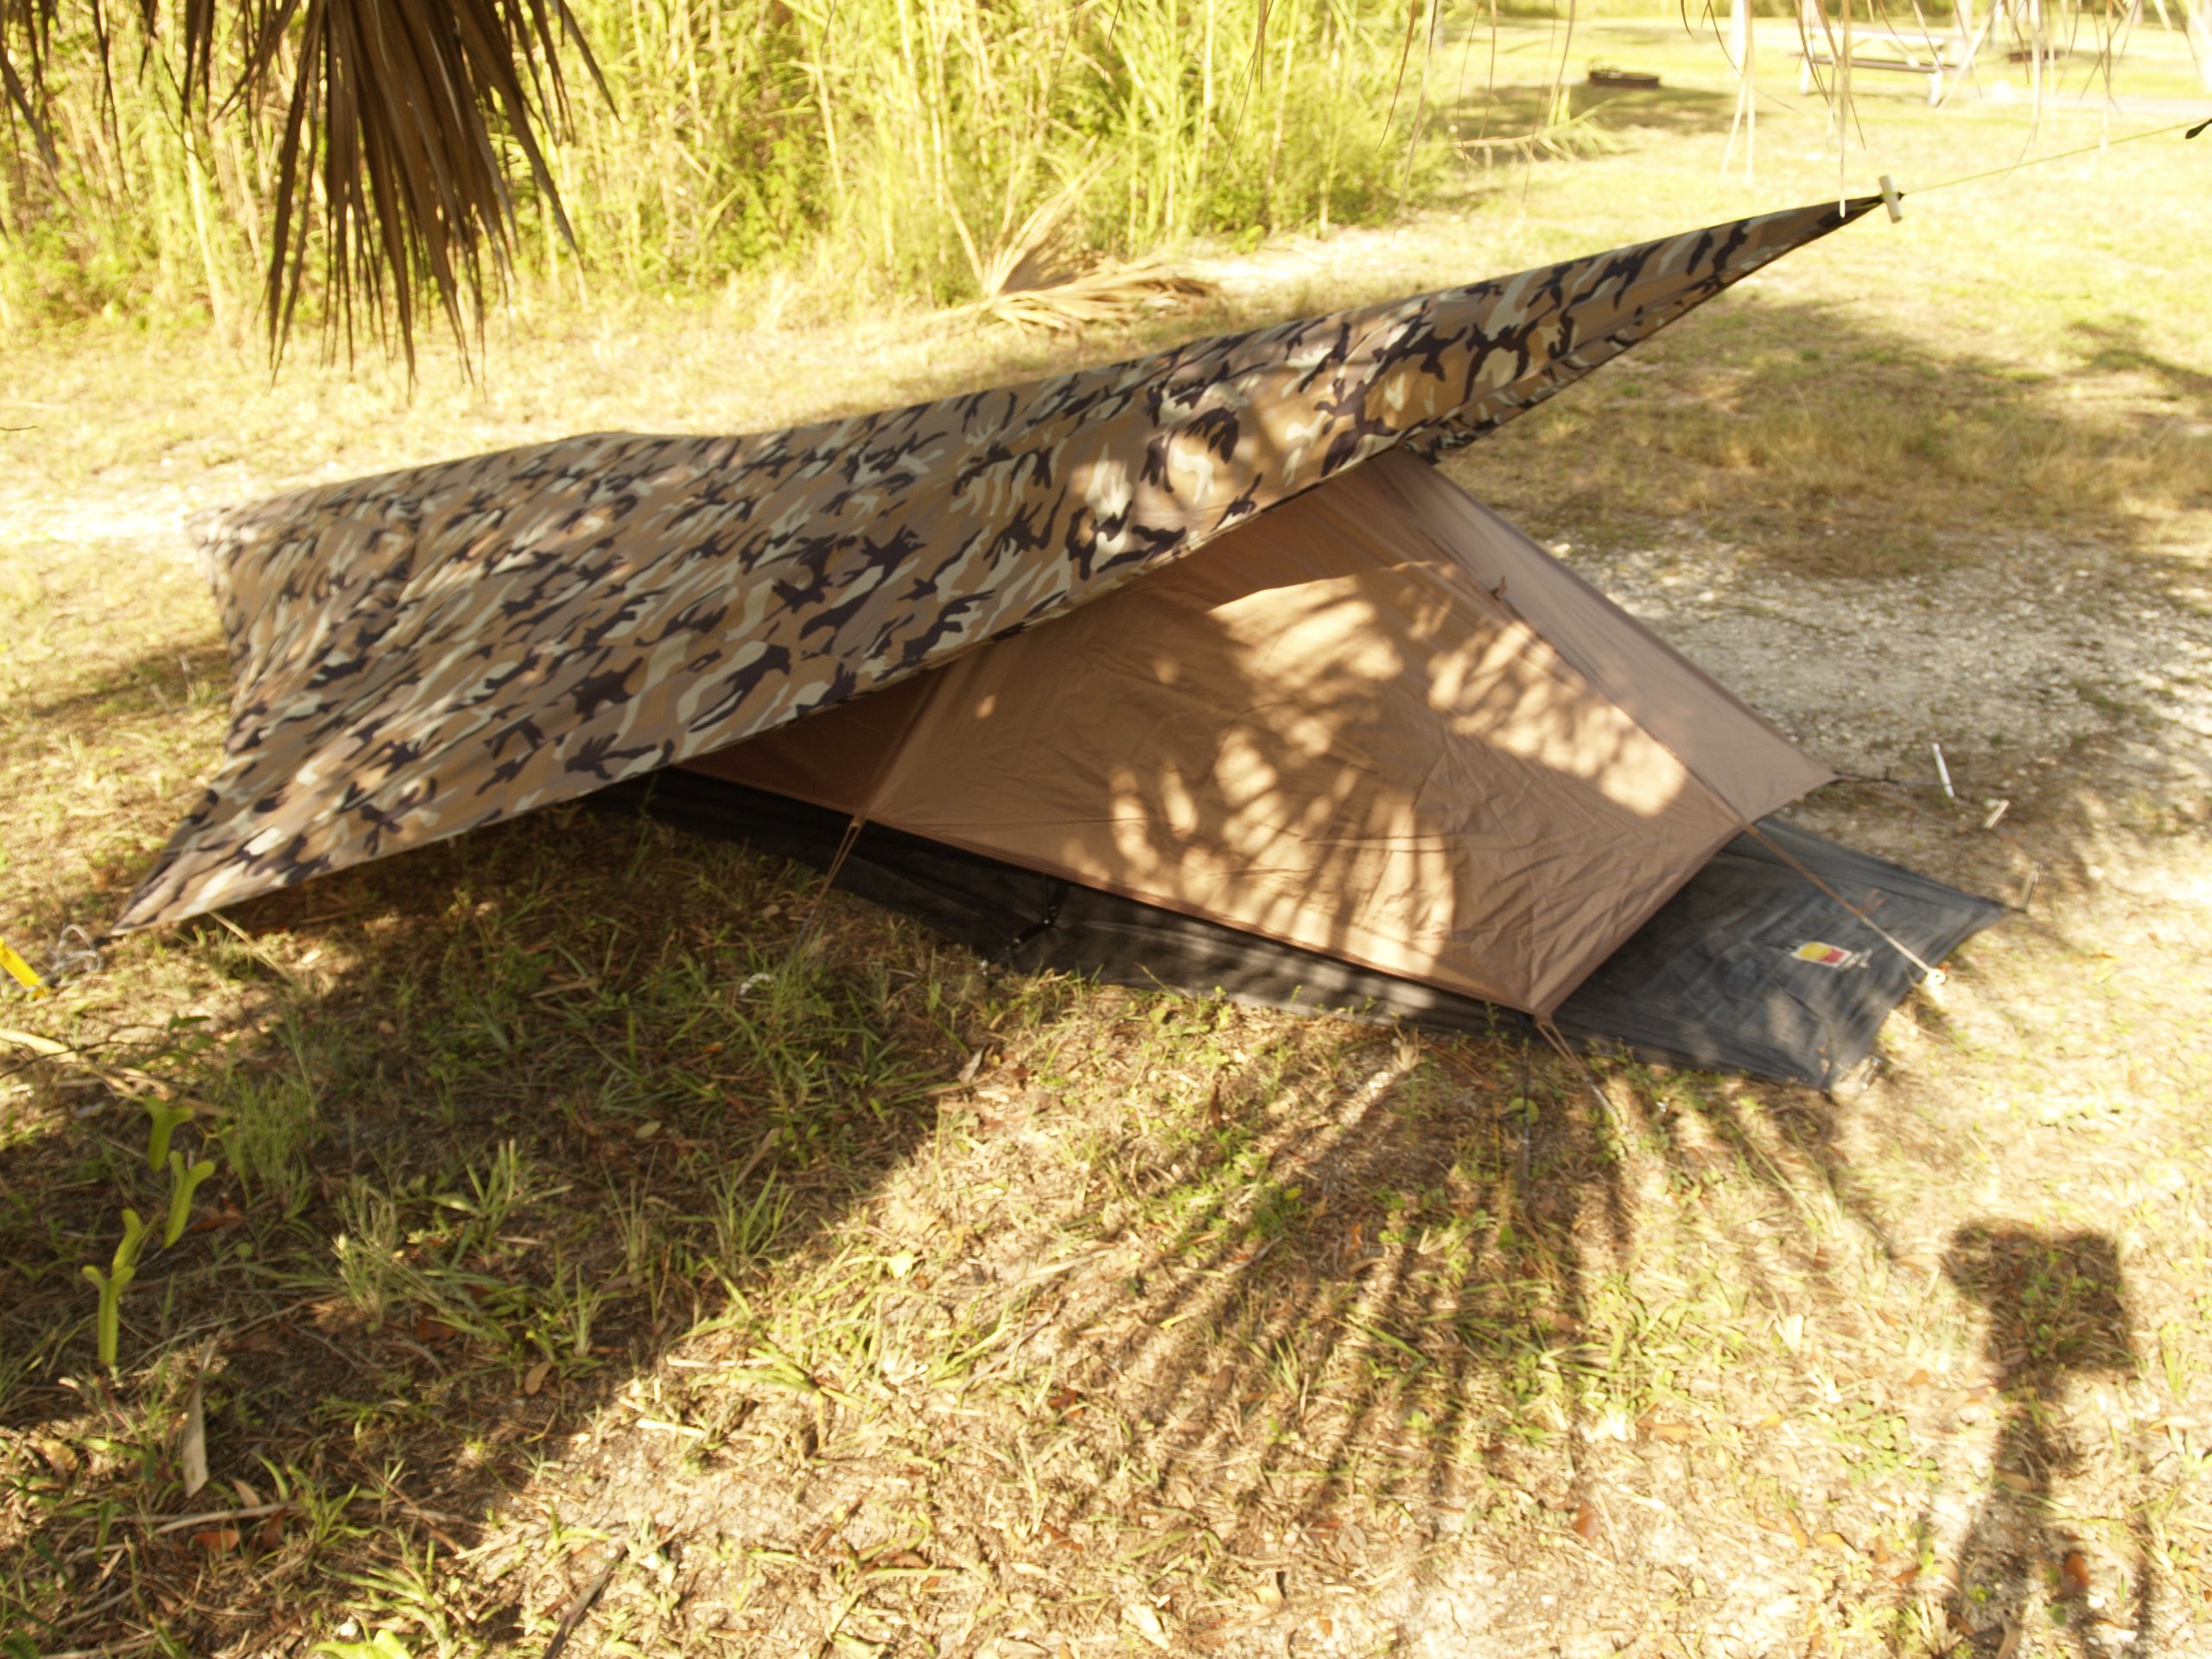 Adding an extra tarp for gear cover and additional concealment.